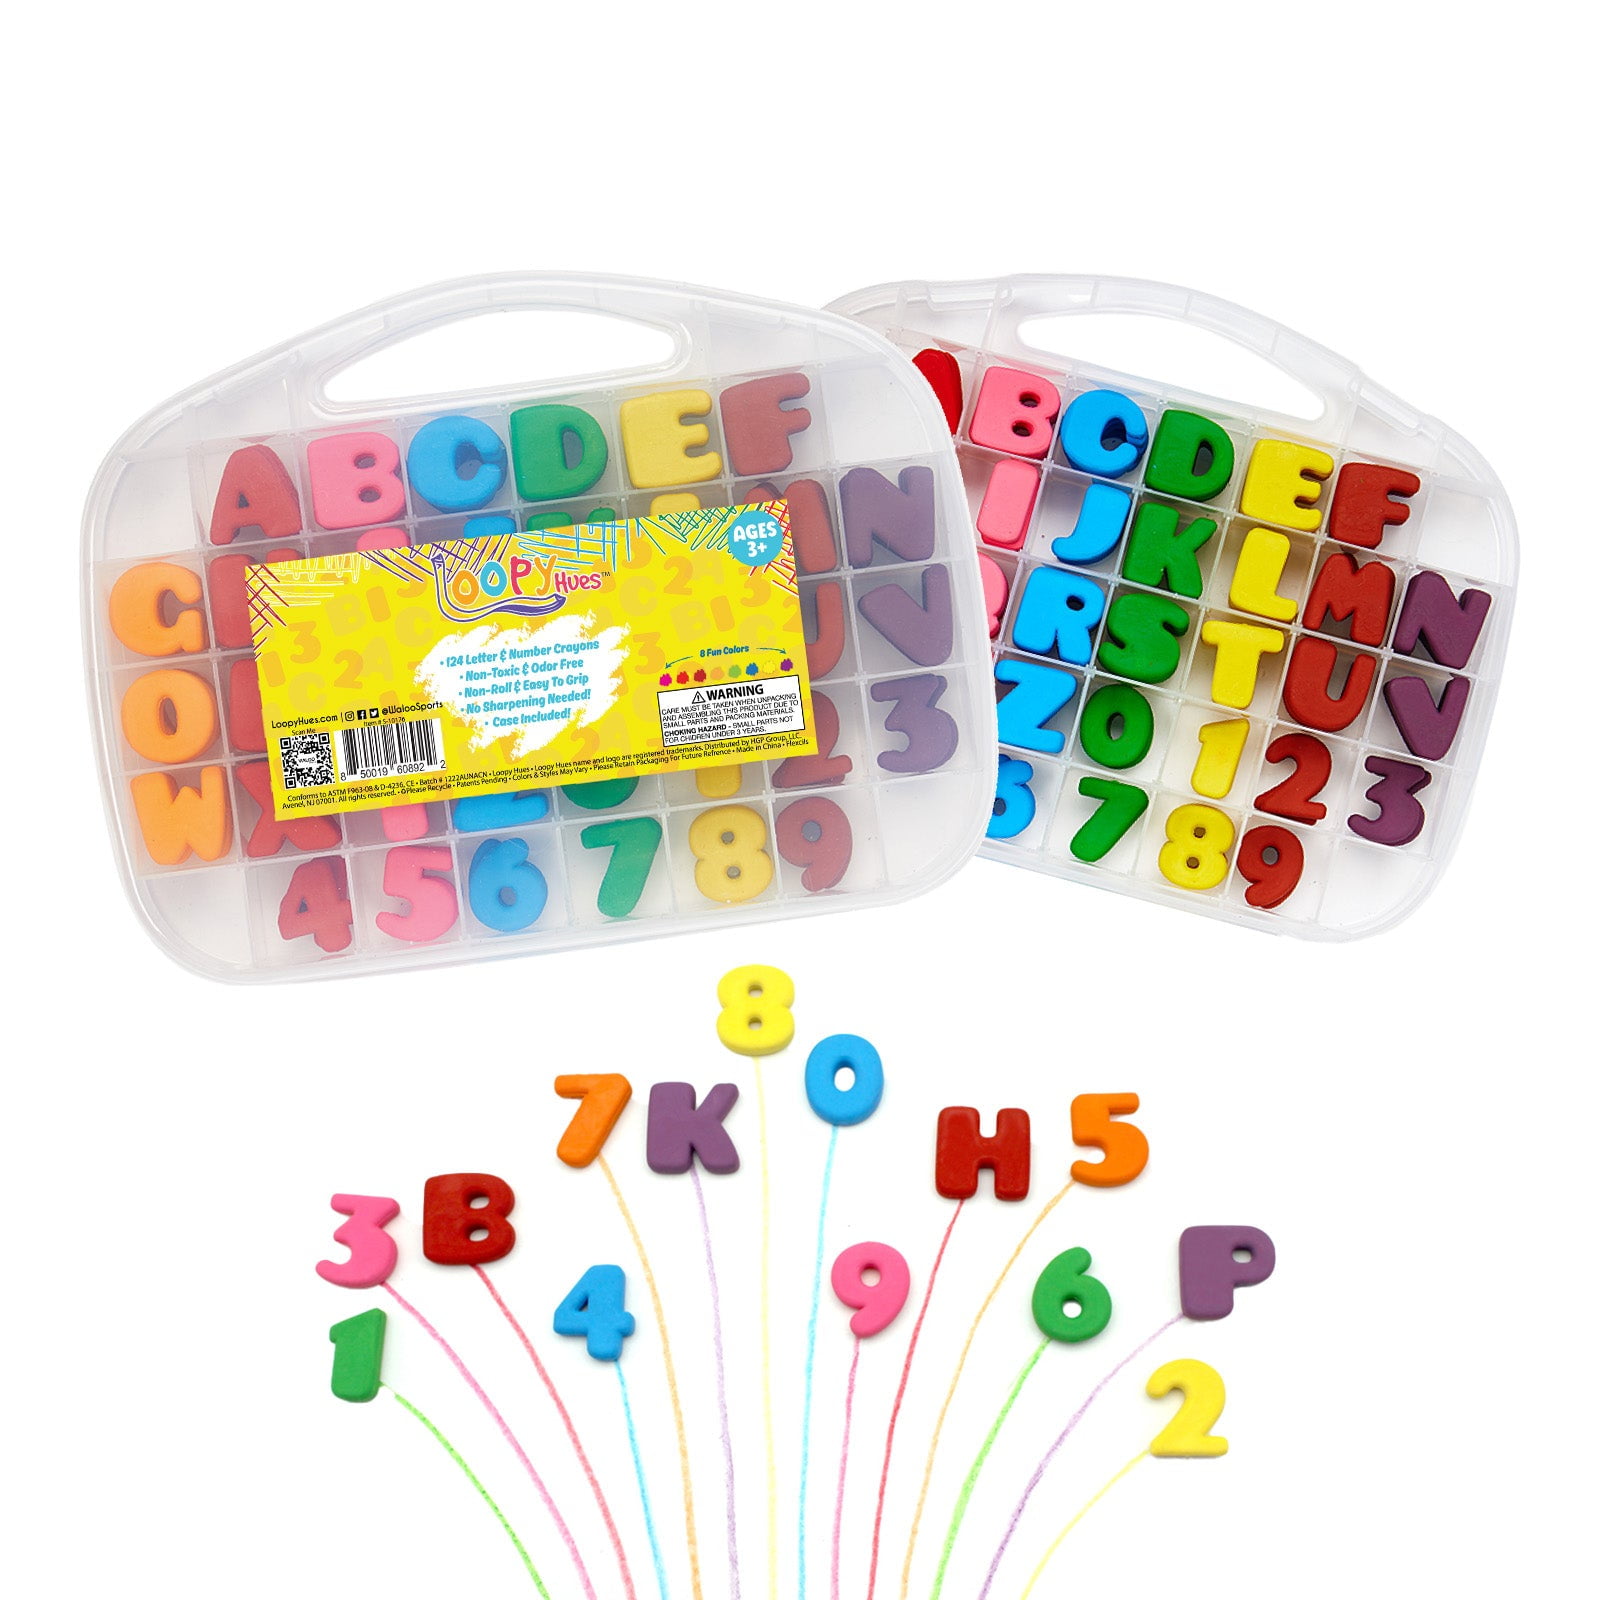 Loopy Hues Bendable Crayons for Kids, Arts & Crafts, School Supplies, 3D  Letter & Number Assorted Colors Ages 3+